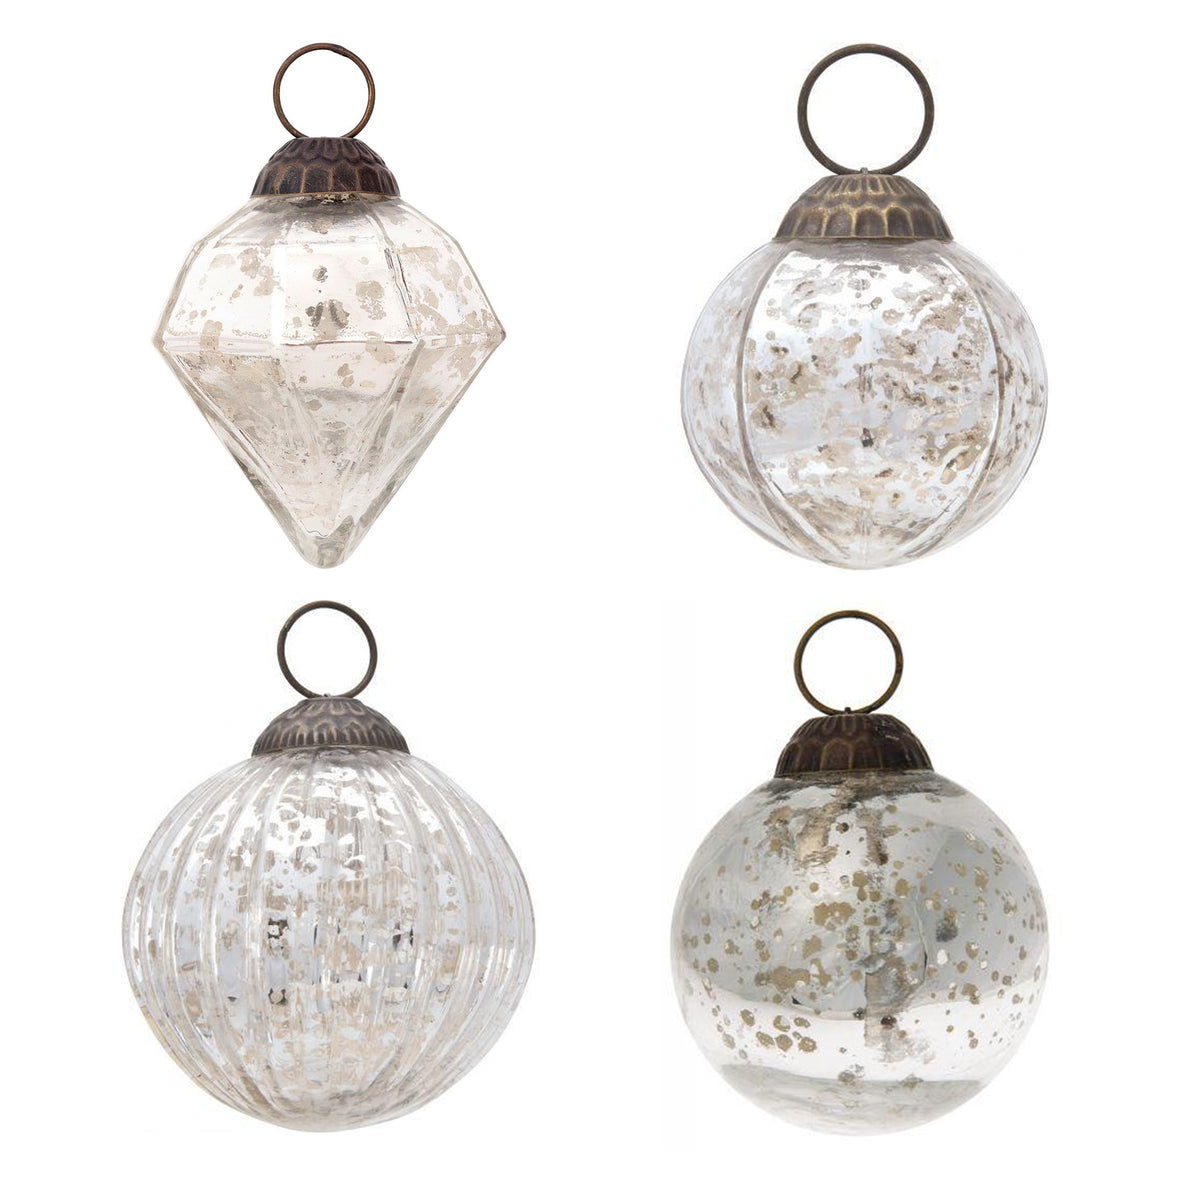 4 Pack | Silver Best of Show Assorted Ornaments Set - Great Gift Idea, Vintage-Style Decorations for Christmas, Special Occasions, Home Decor and Parties